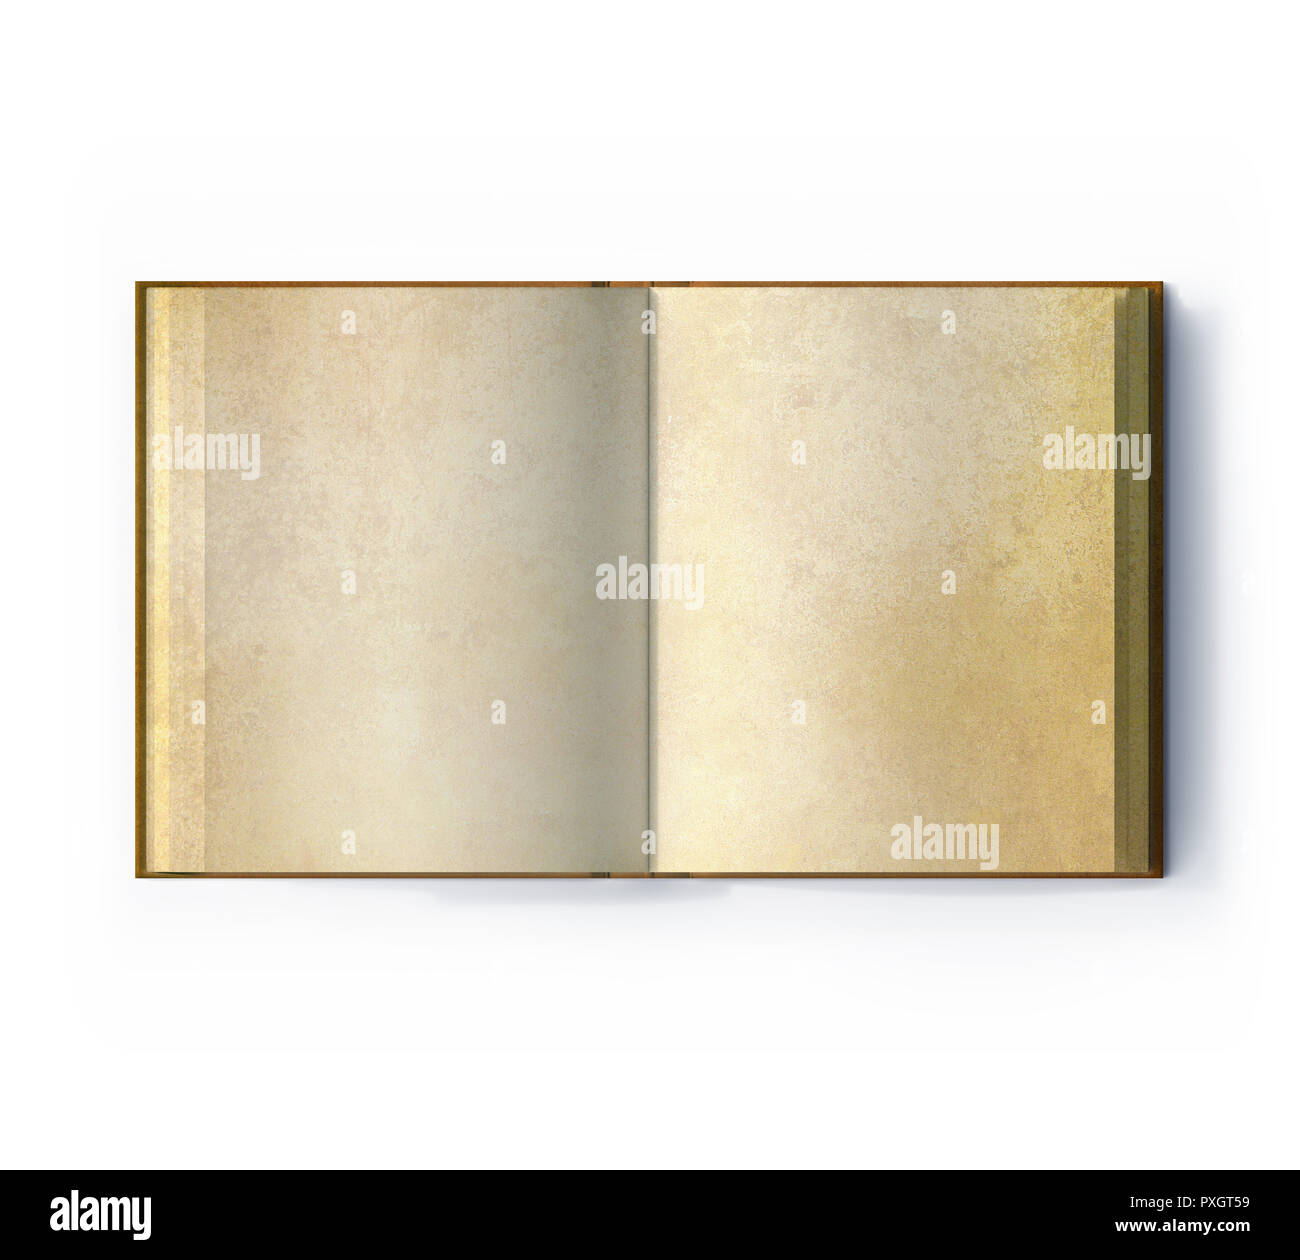 Top view of an old open book on empty used pages, isolated on white background Stock Photo